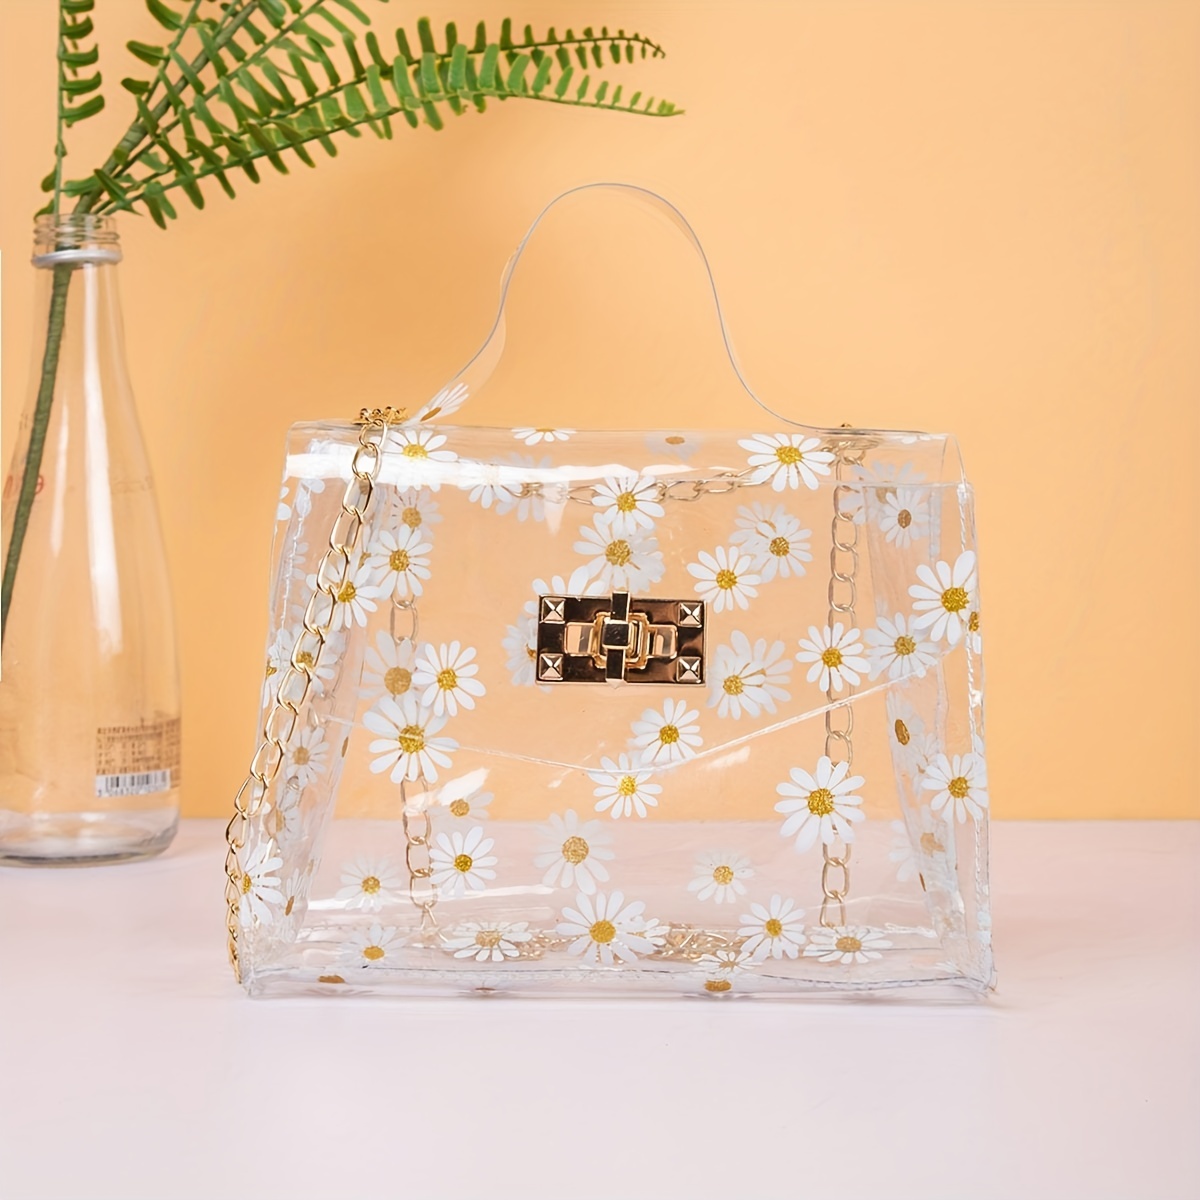 Transparent Jelly Bag Women's Fashion Handbags Candy Color Clear Shoulder  Bags for Female Clear Beach Crossbody Bags Tote Bolsa